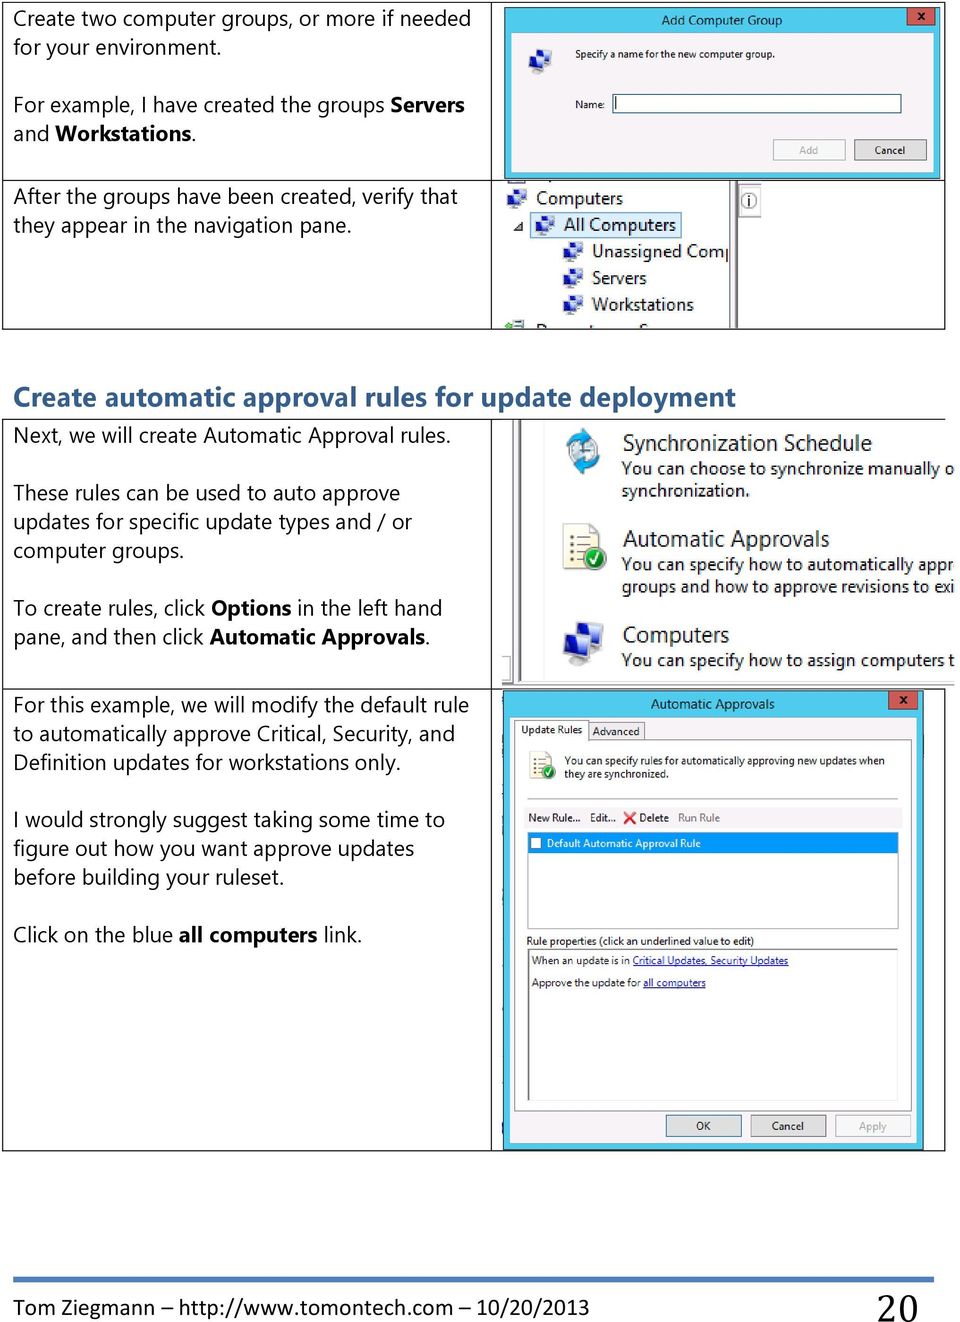 These rules can be used to auto approve updates for specific update types and / or computer groups. To create rules, click Options in the left hand pane, and then click Automatic Approvals.